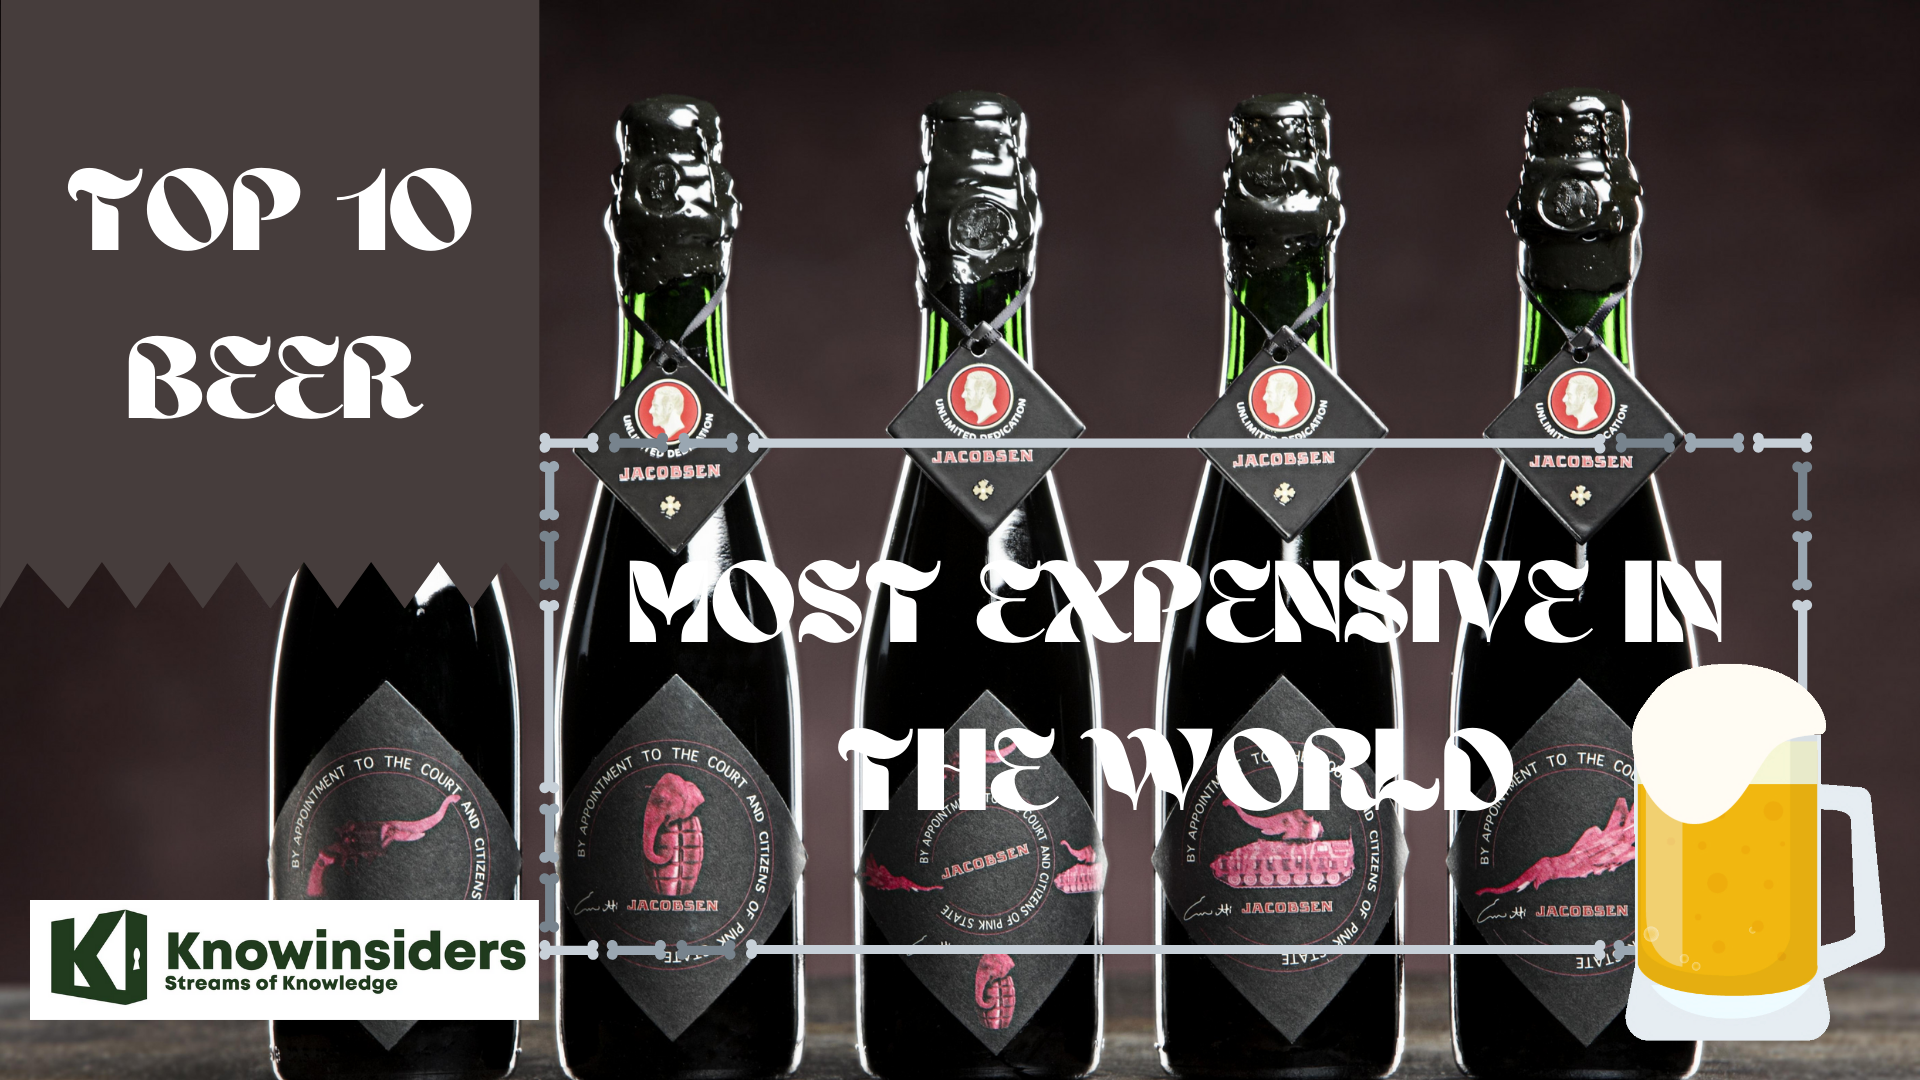 Top 10 Beers - Most Expensive In The World